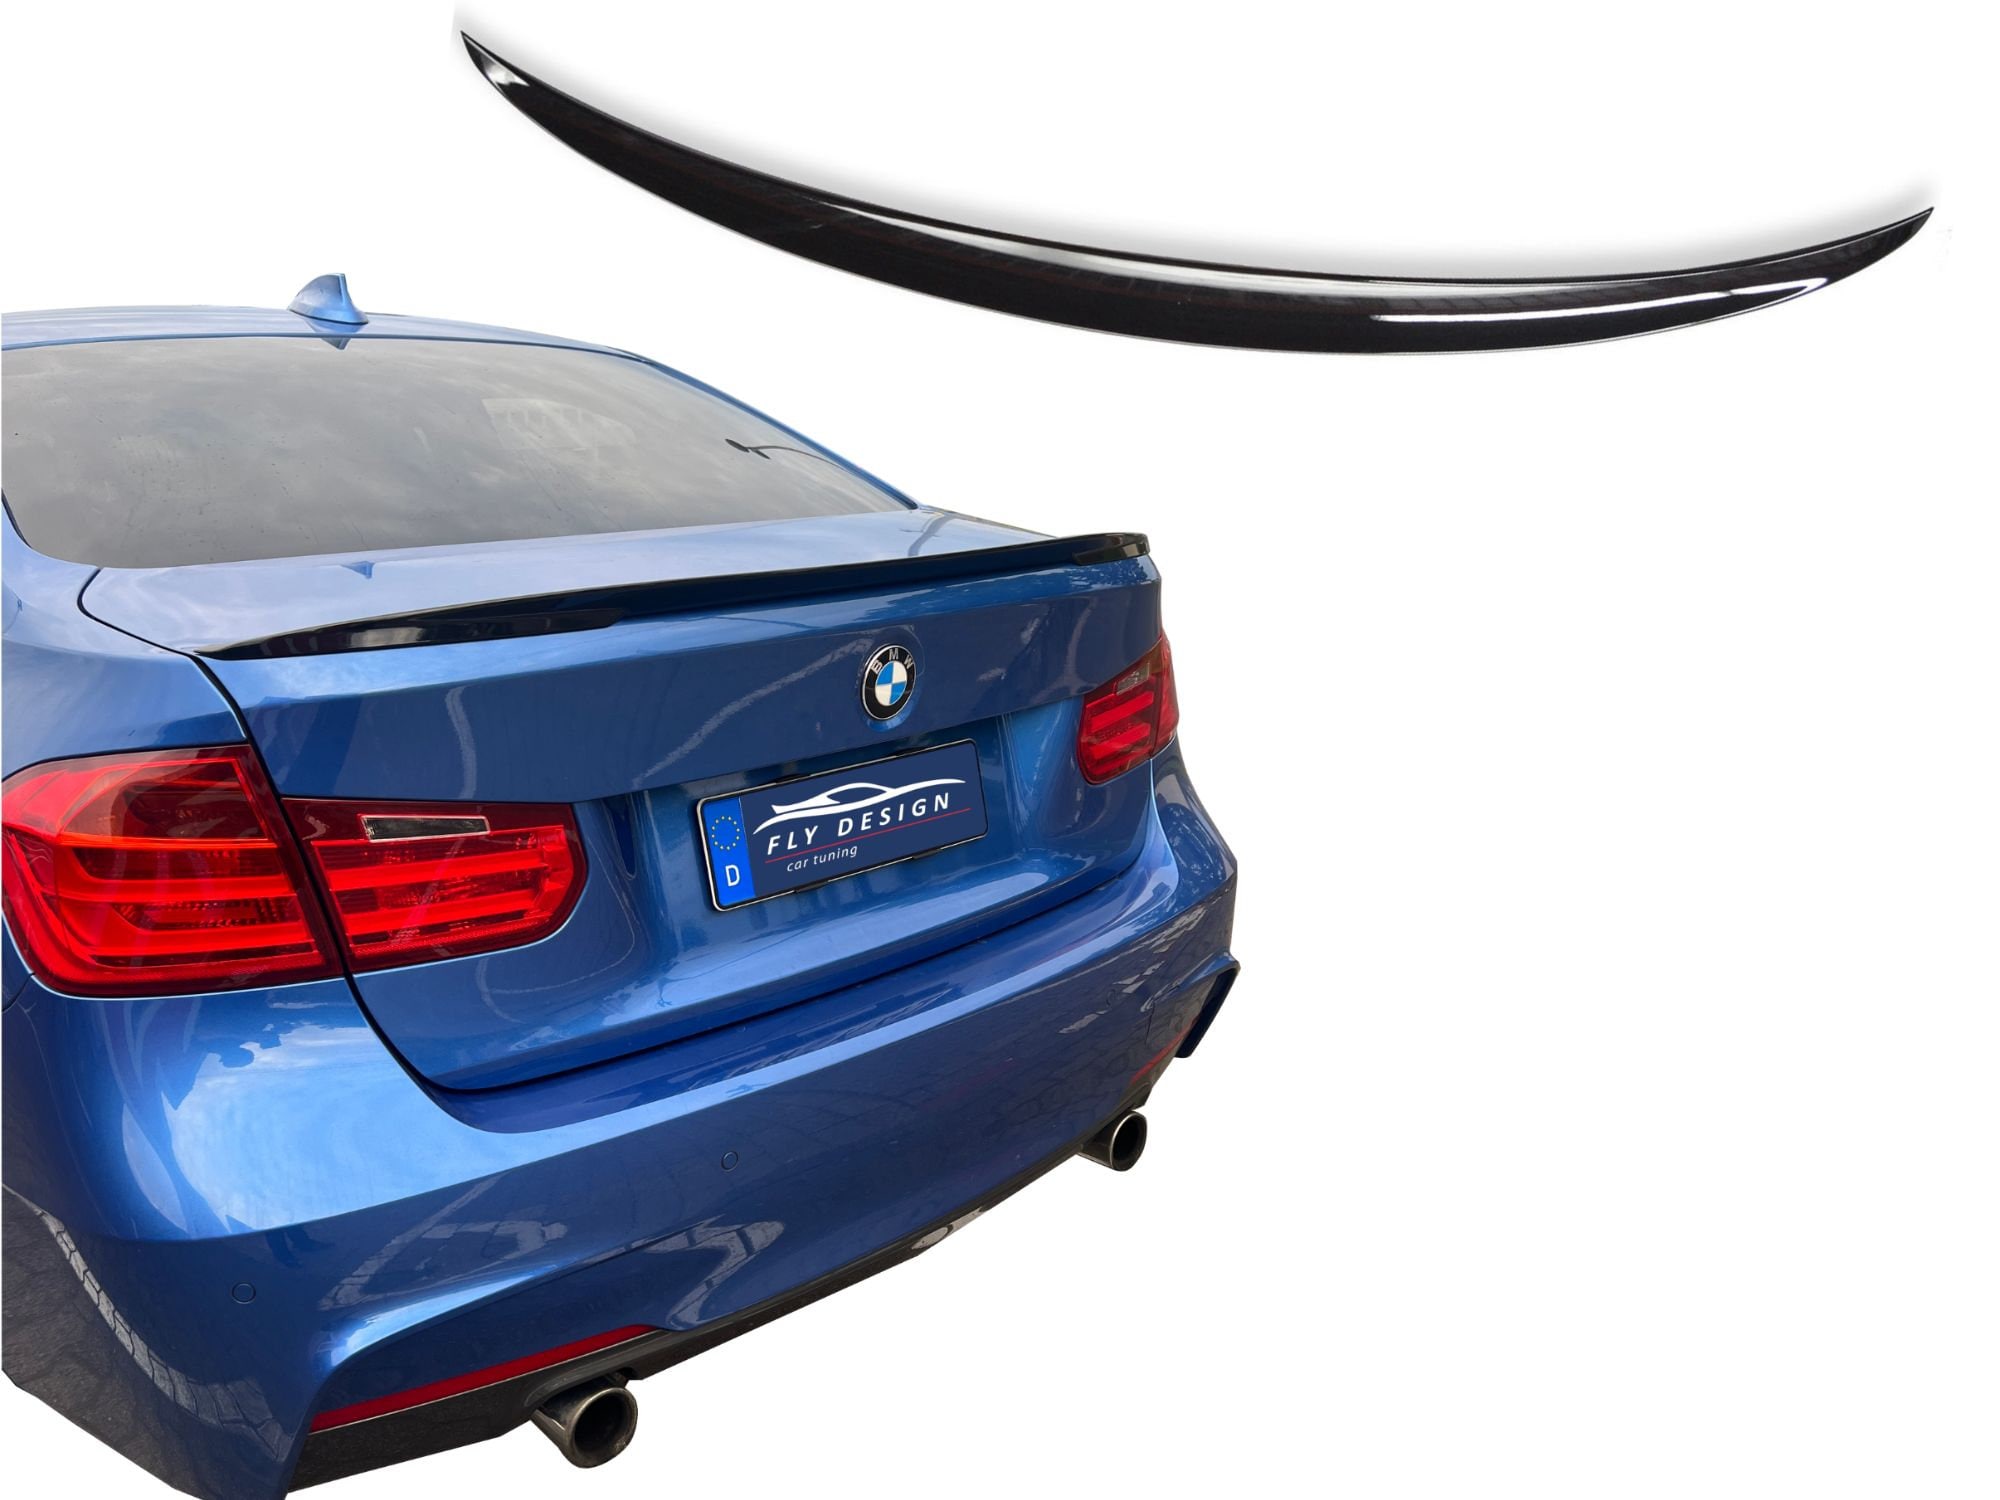 Rear Spoiler Suitable for BMW F30 3 Series Limo, Rear Wing, Spoiler Lip for  Car Tuning, in P-style, ABS Plastic 